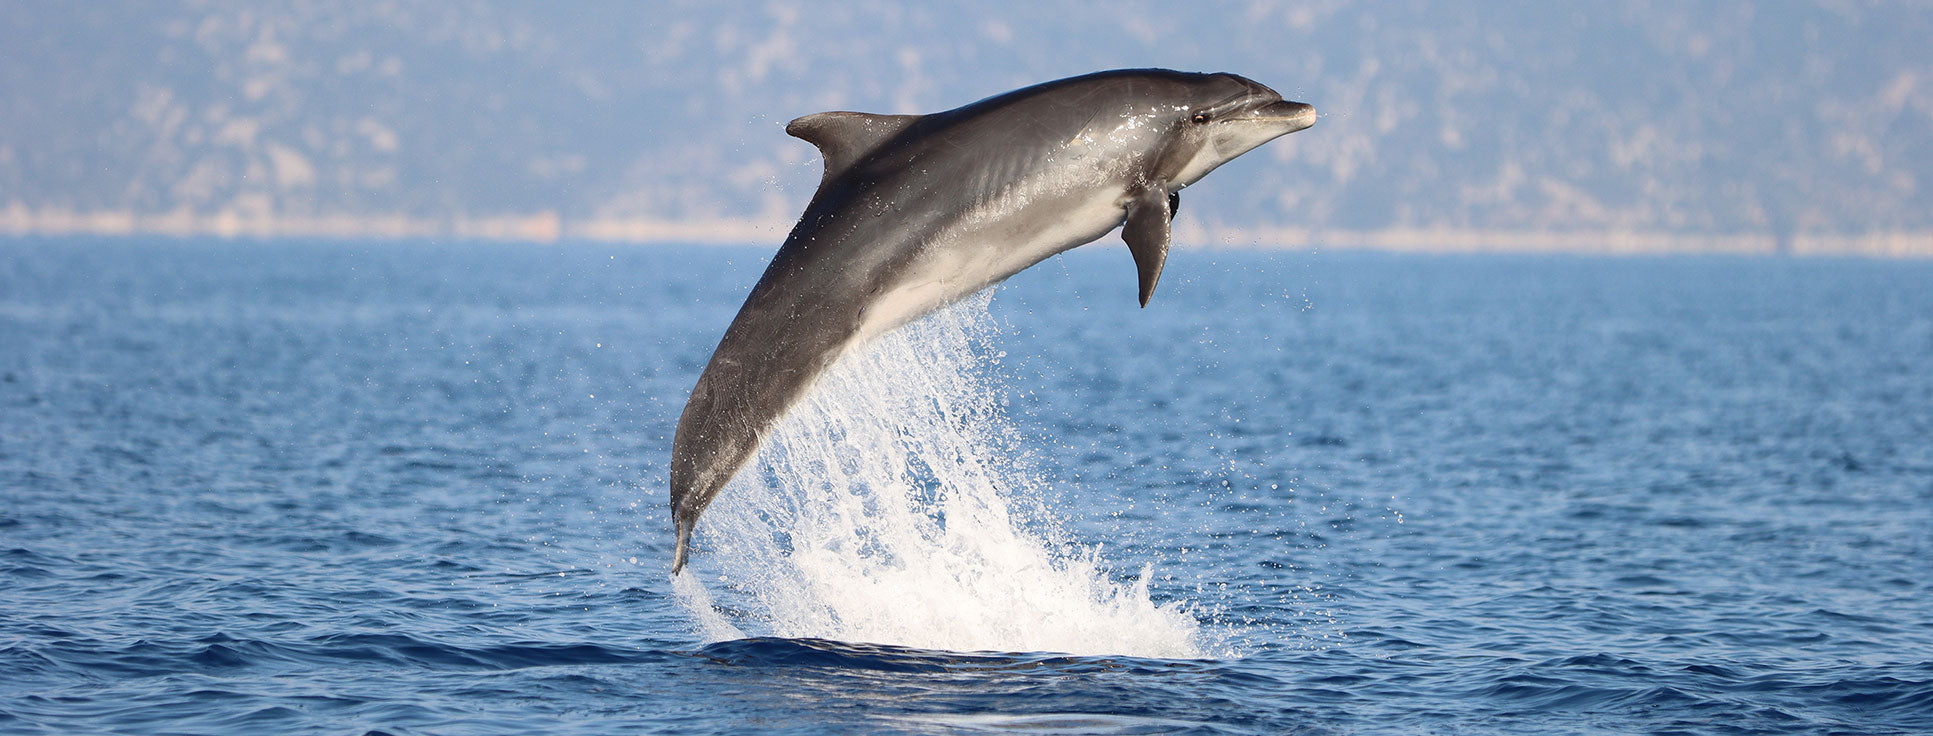 Short-beaked common dolphin leaping out of water